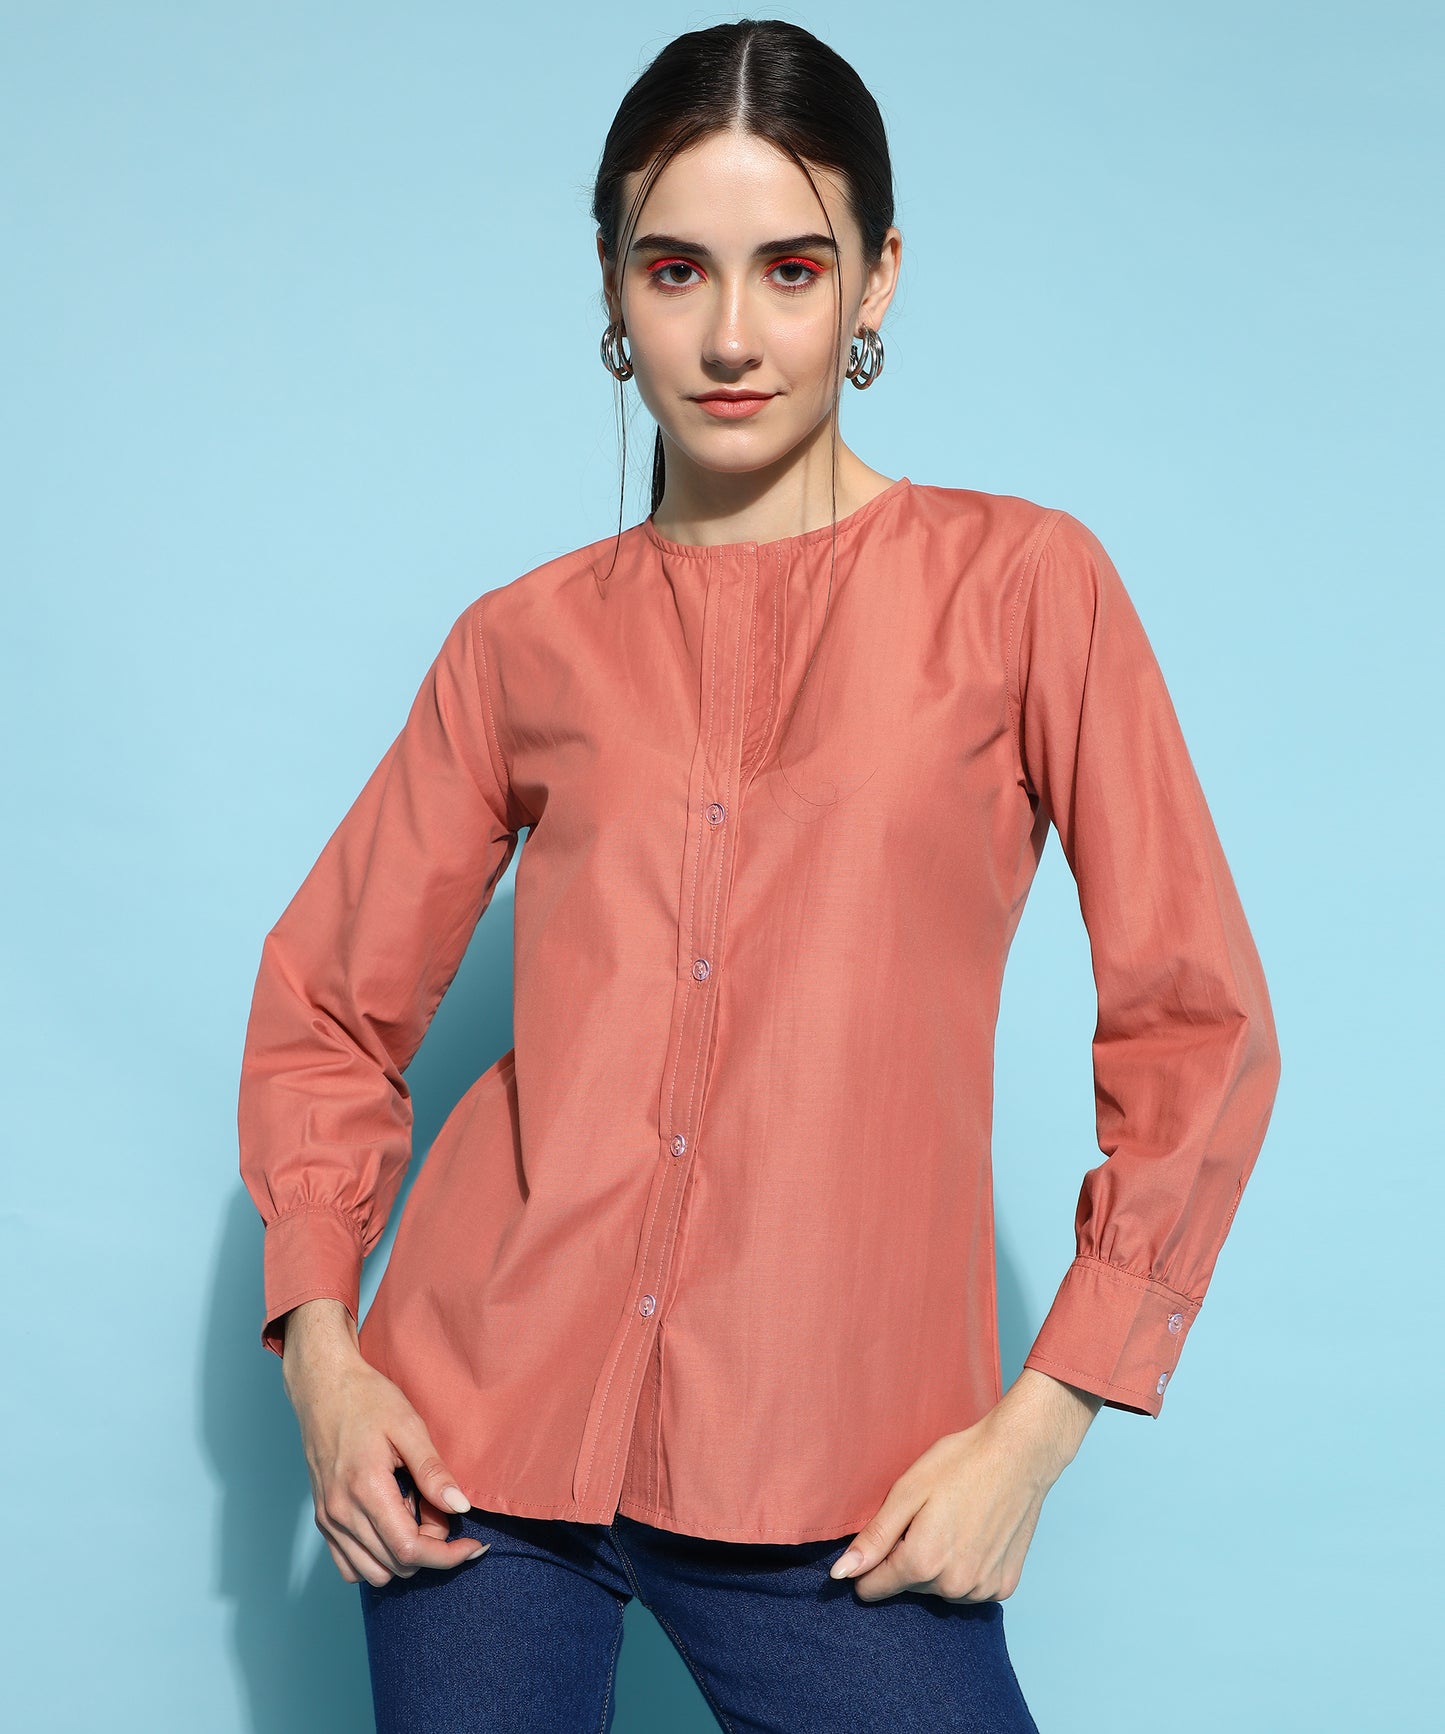 ANUSHIL Women's Formal Shirts Collection: Blue Cotton, Regular Fit, Full Sleeves - Perfect for Office